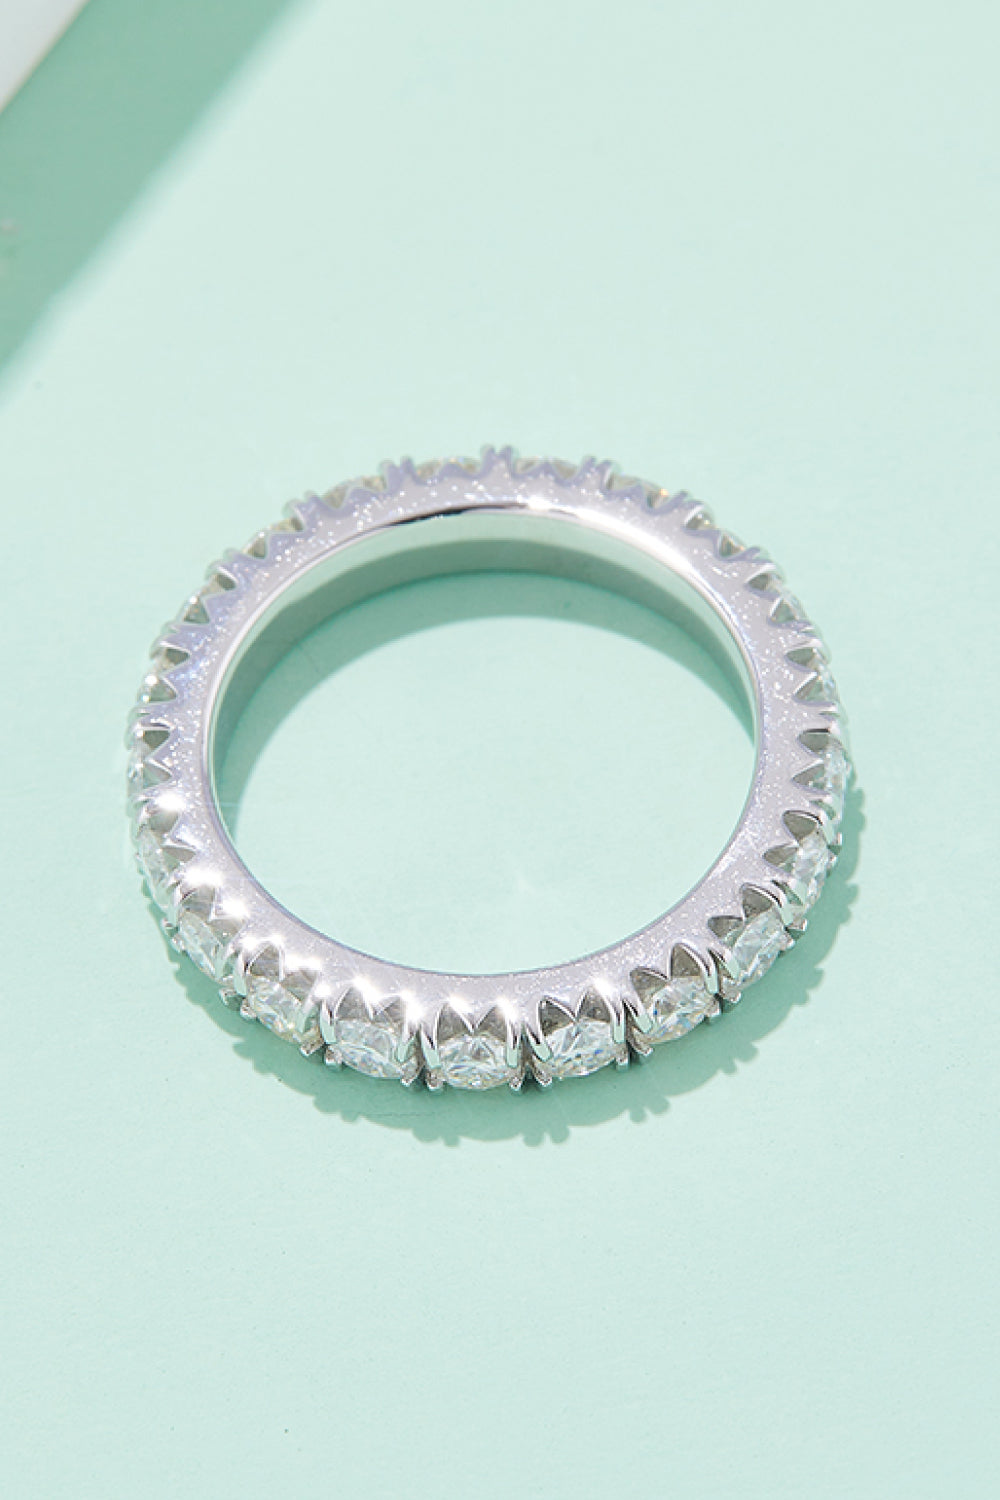 2.3 Carat Adored Moissanite 925 Sterling Silver Eternity Ring